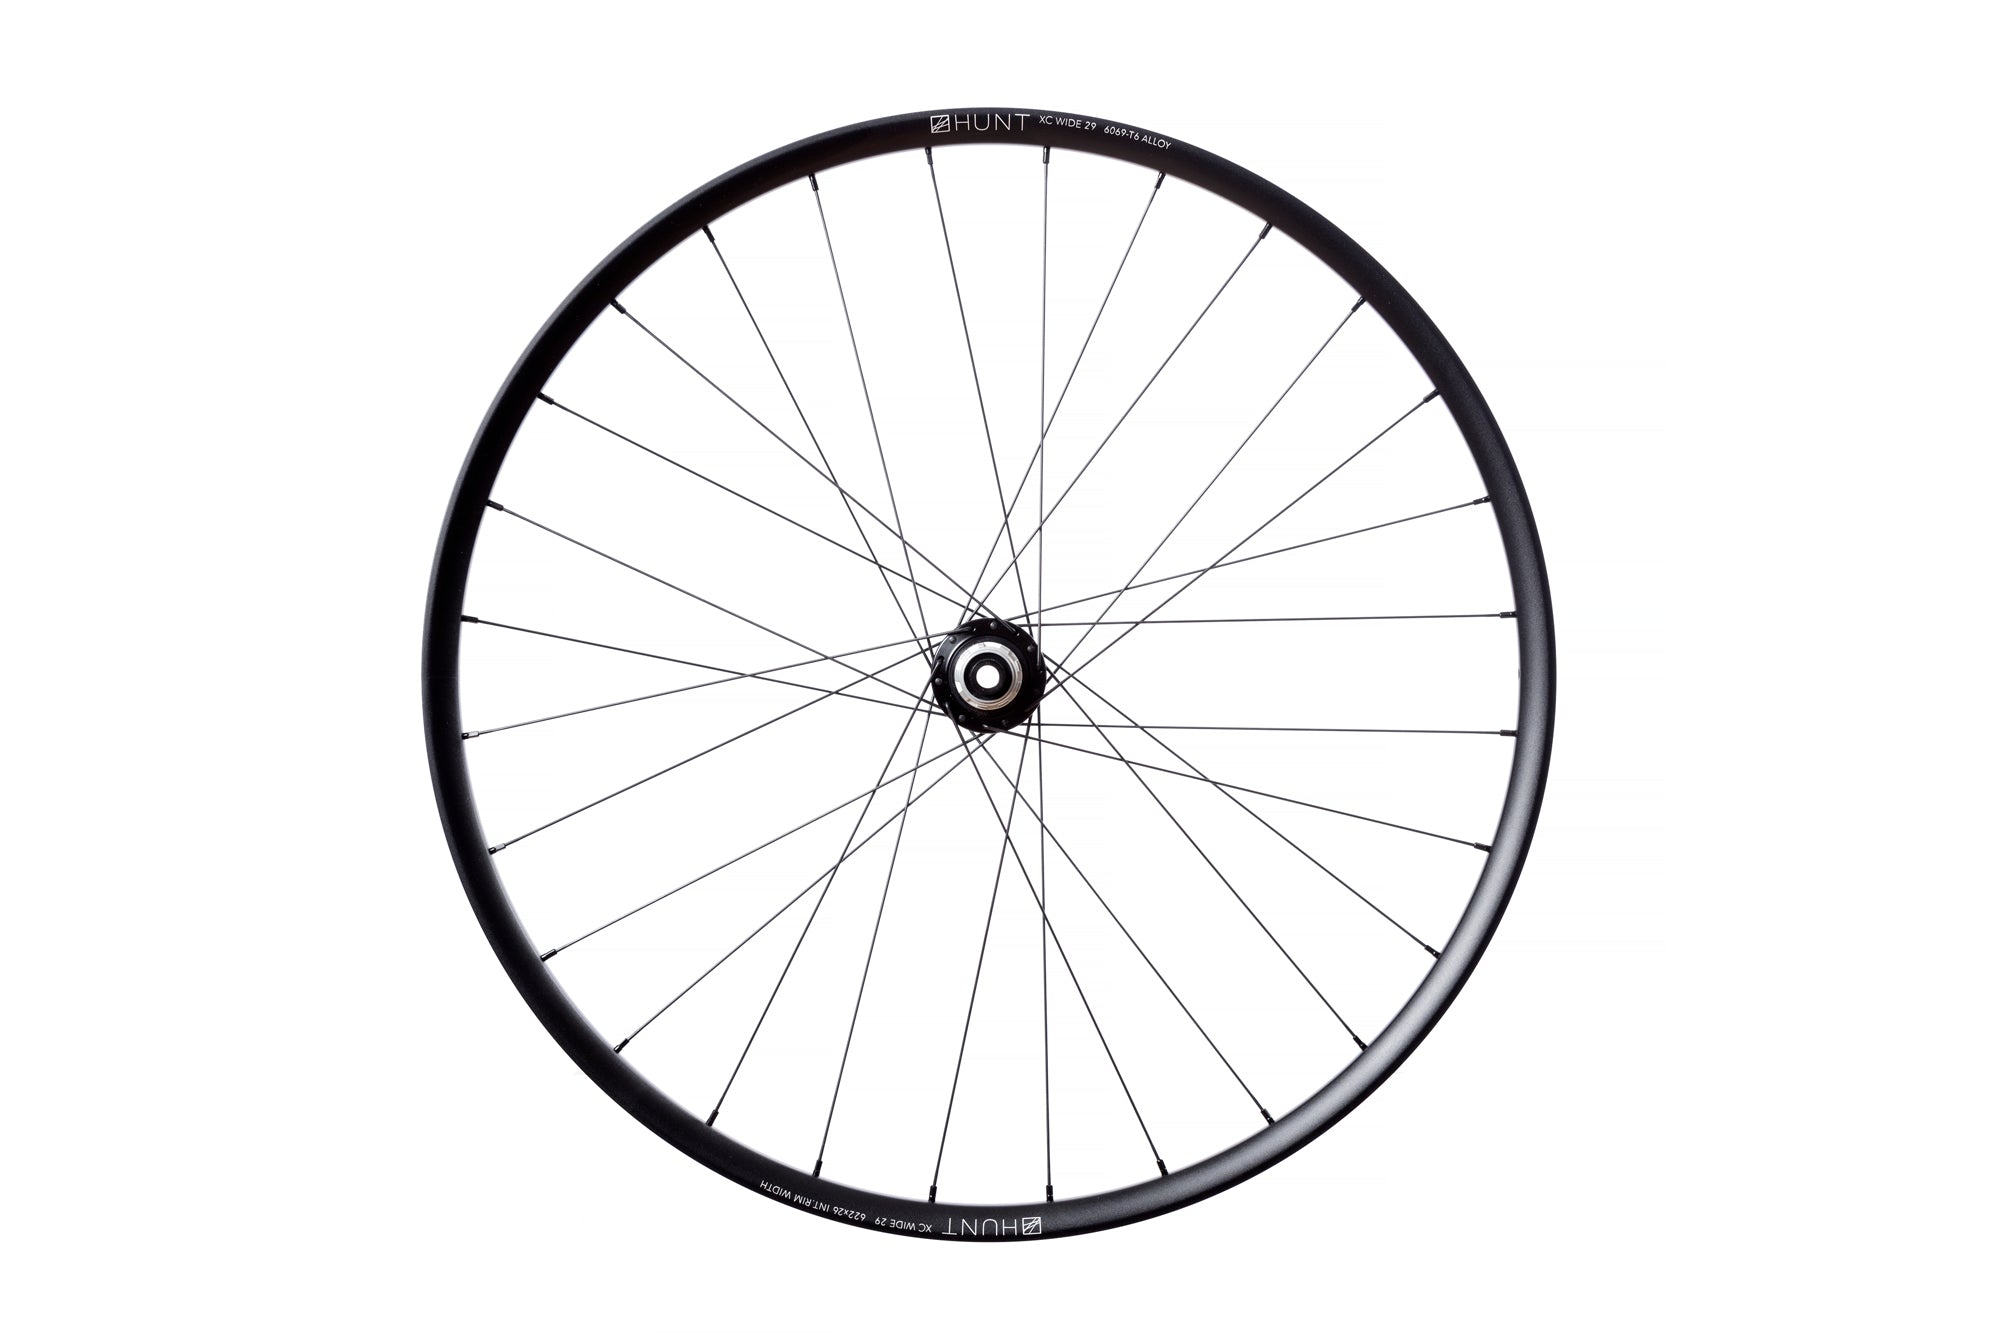 <h1>Rims</h1><i>Highly impact resistant 6069 T6 rim construction boasting a wide 28mm internal front and 26mm internal rear for optimal performance on any terrain. FEA modelled and tested in the UK to ensure class-leading impact resistance while retaining a comfortable ride at a competitive weight.</i>